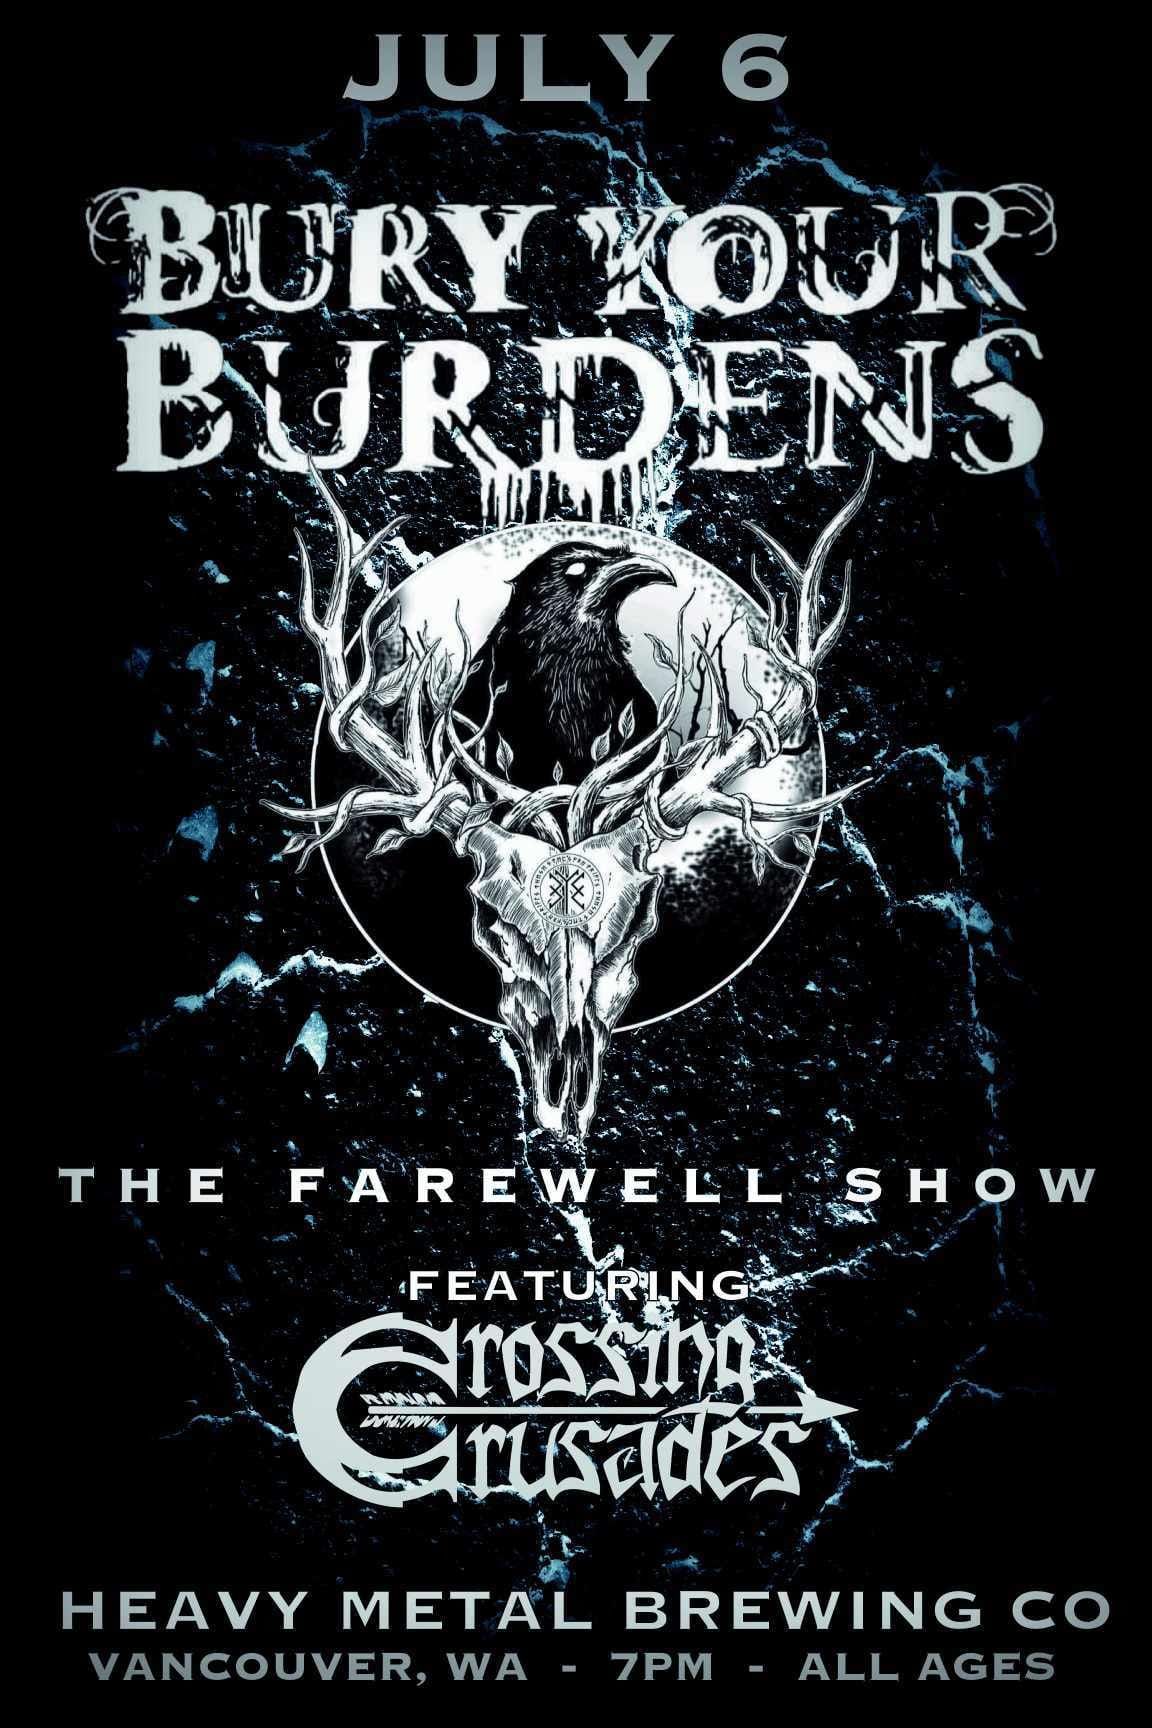 The Farewell Show with Bury Your Brudens and special guest Crossing Crusades